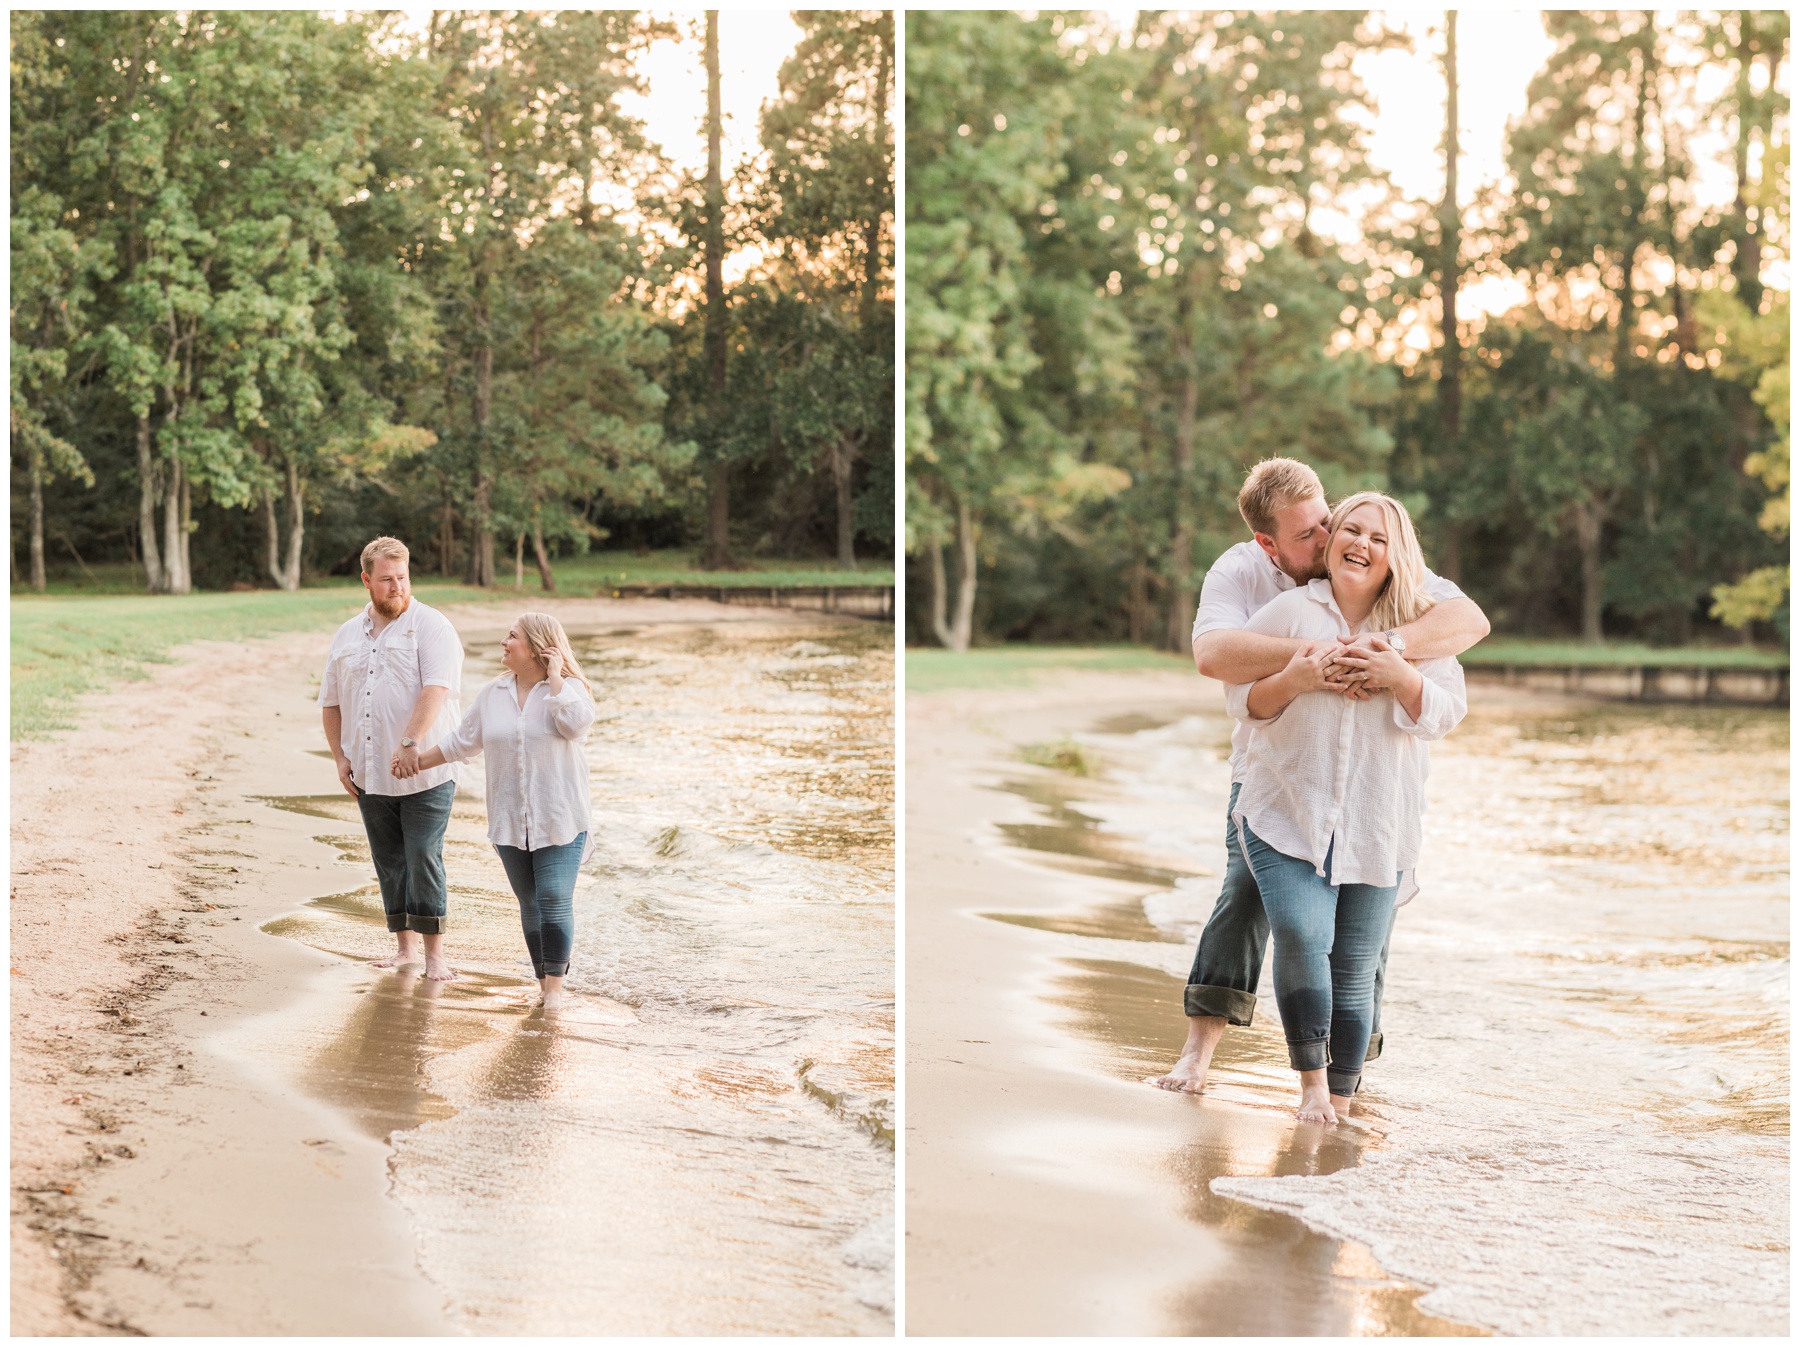 Bride and groom wearing matching white button-down shirts and jeans for their engagement session